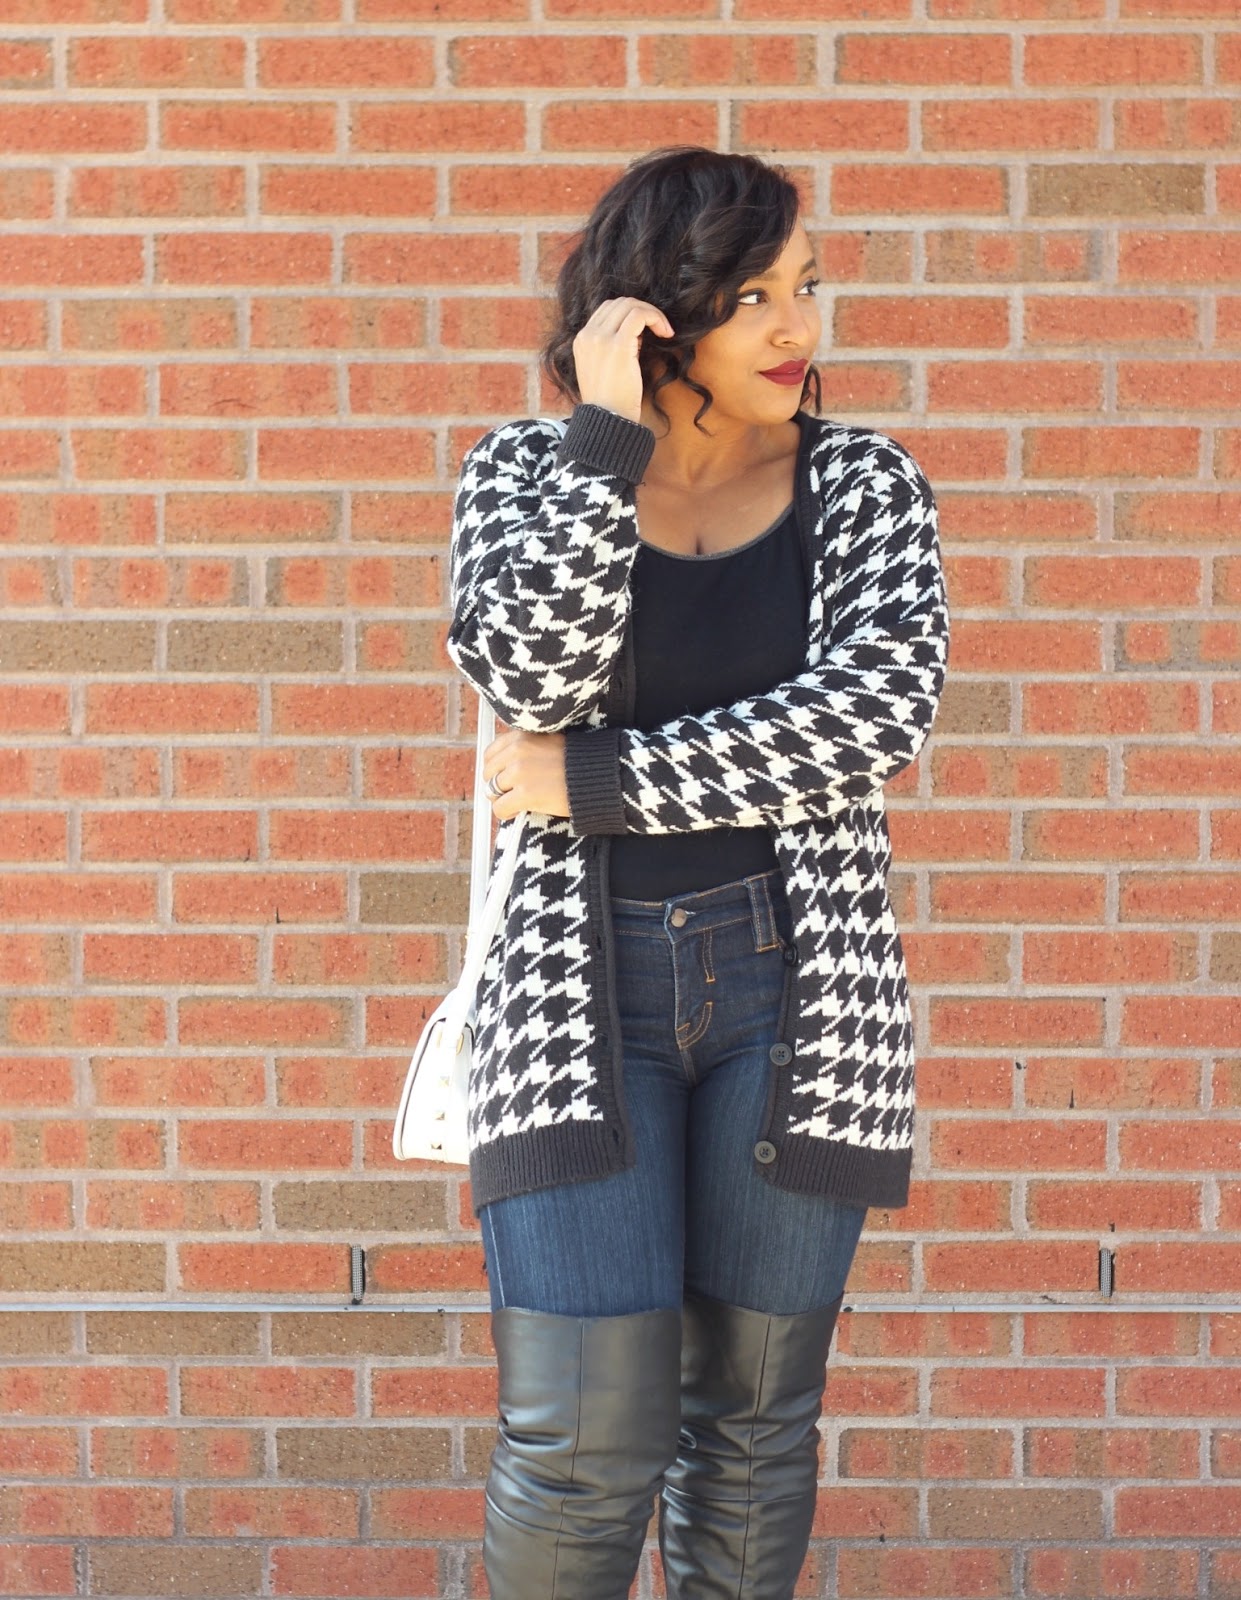 over the knee boots, otk, fall outfits, cardigans, houndstooth print, forever21